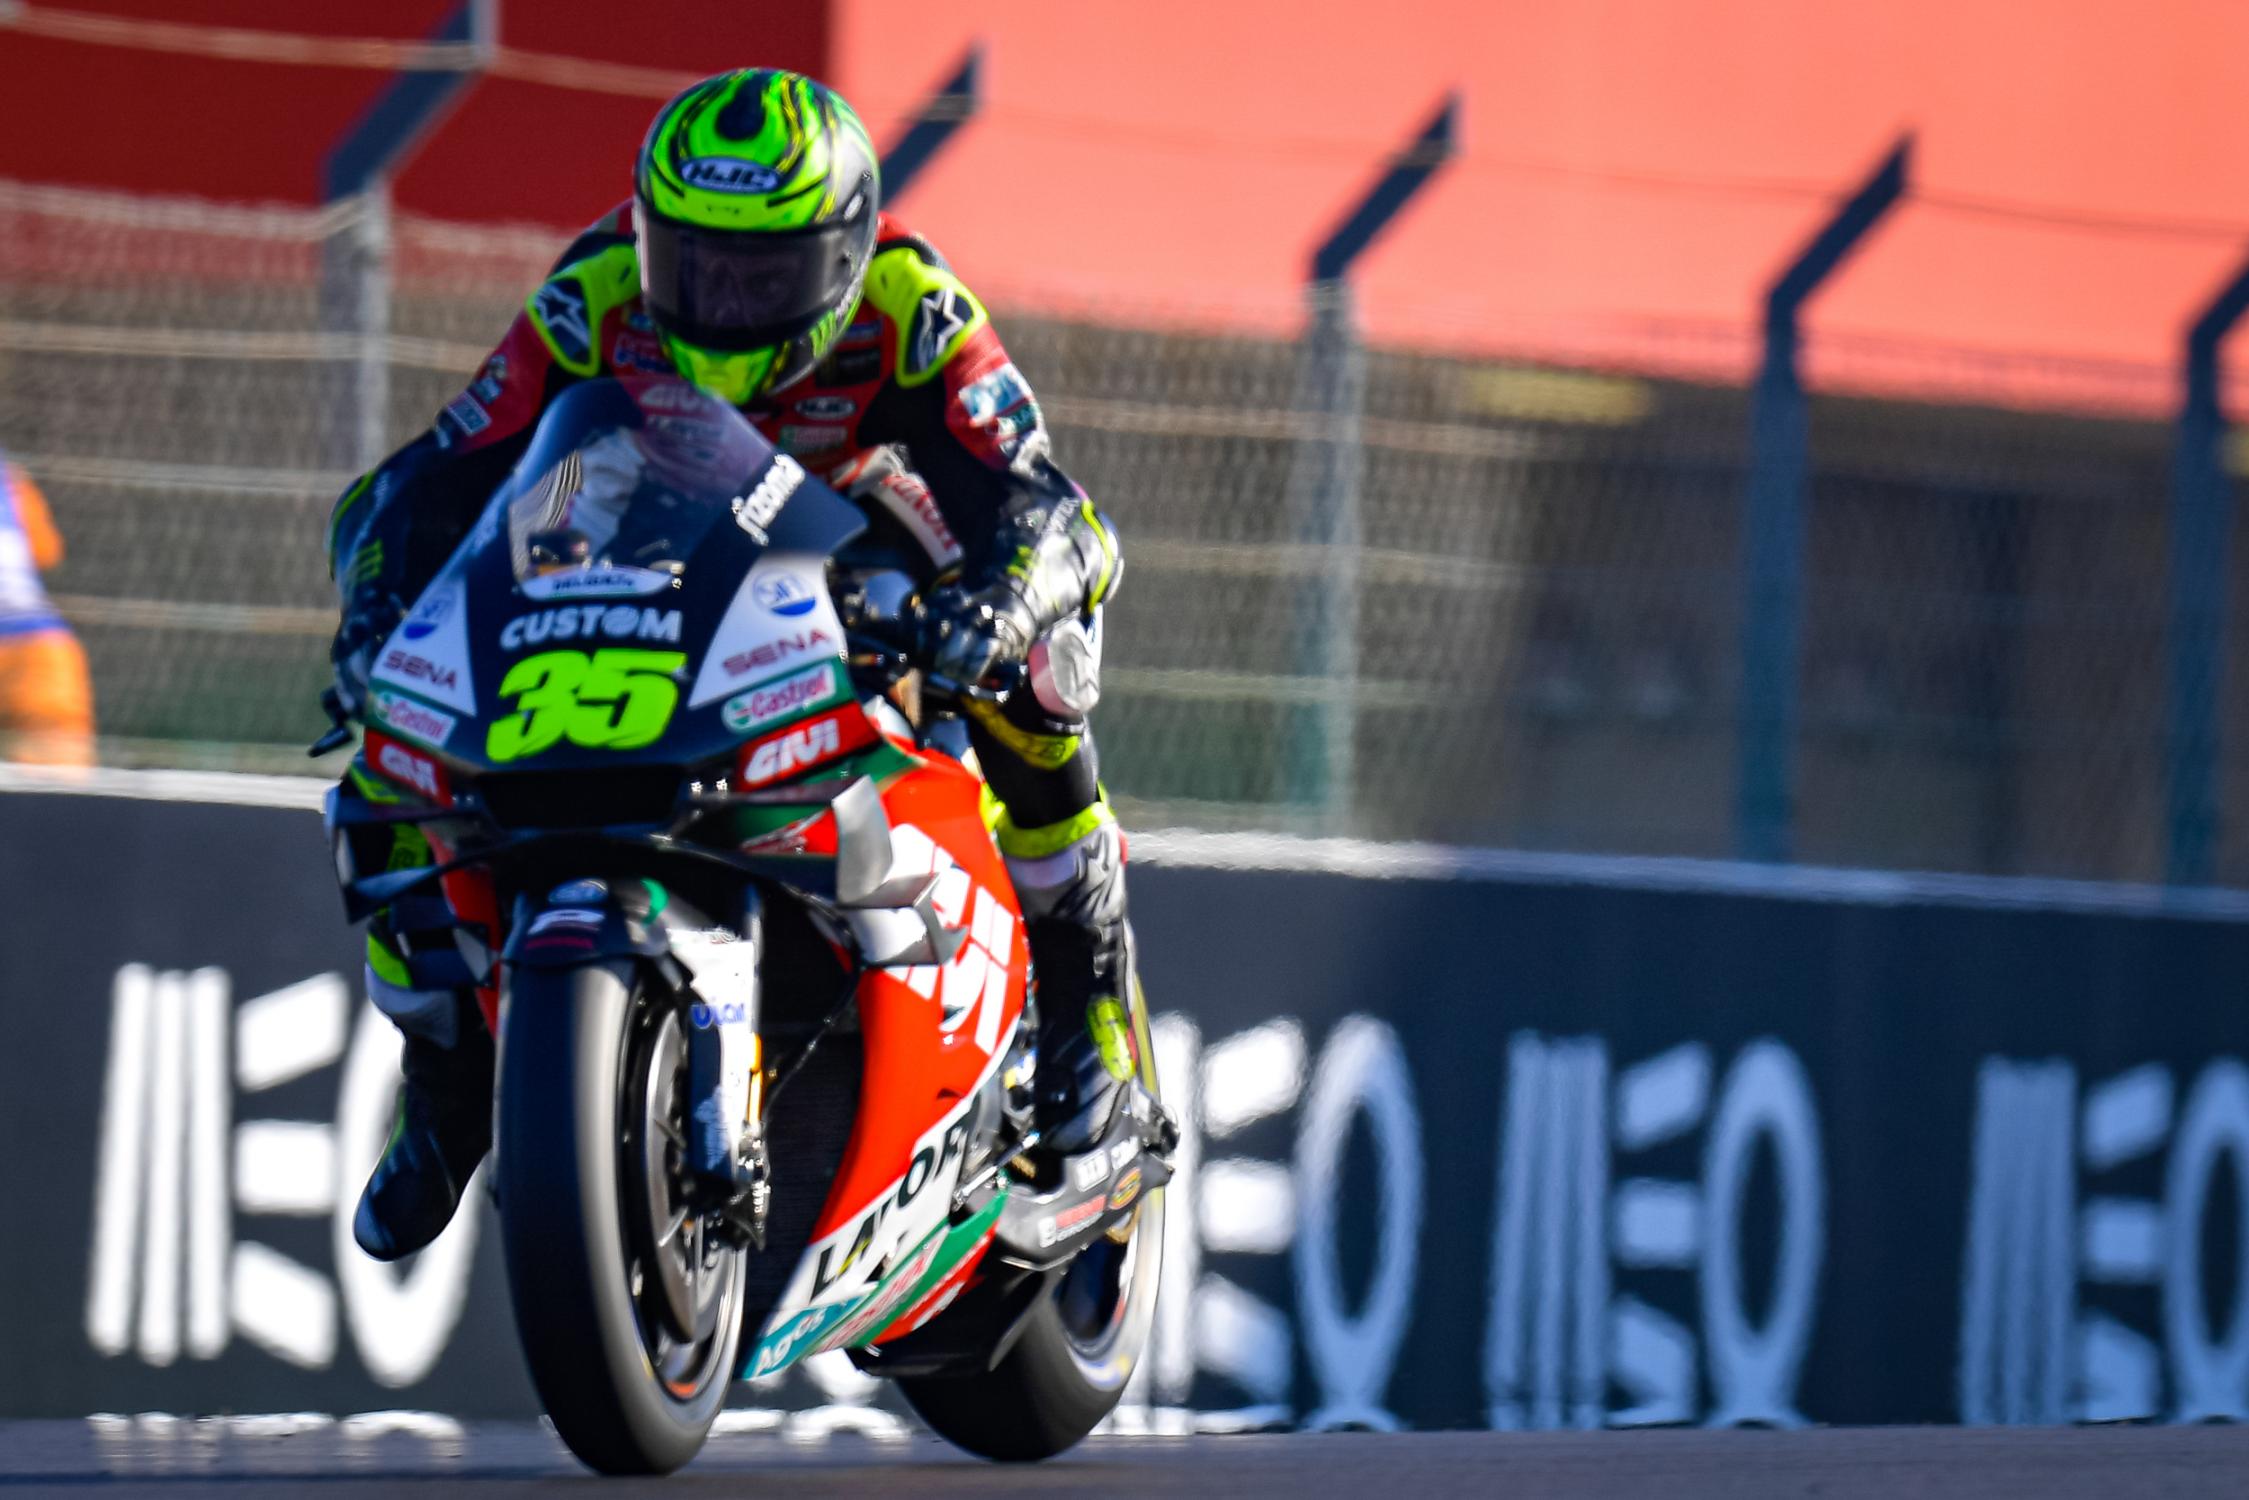 Crutchlow 14th after FP2, top 18 within 1 second.